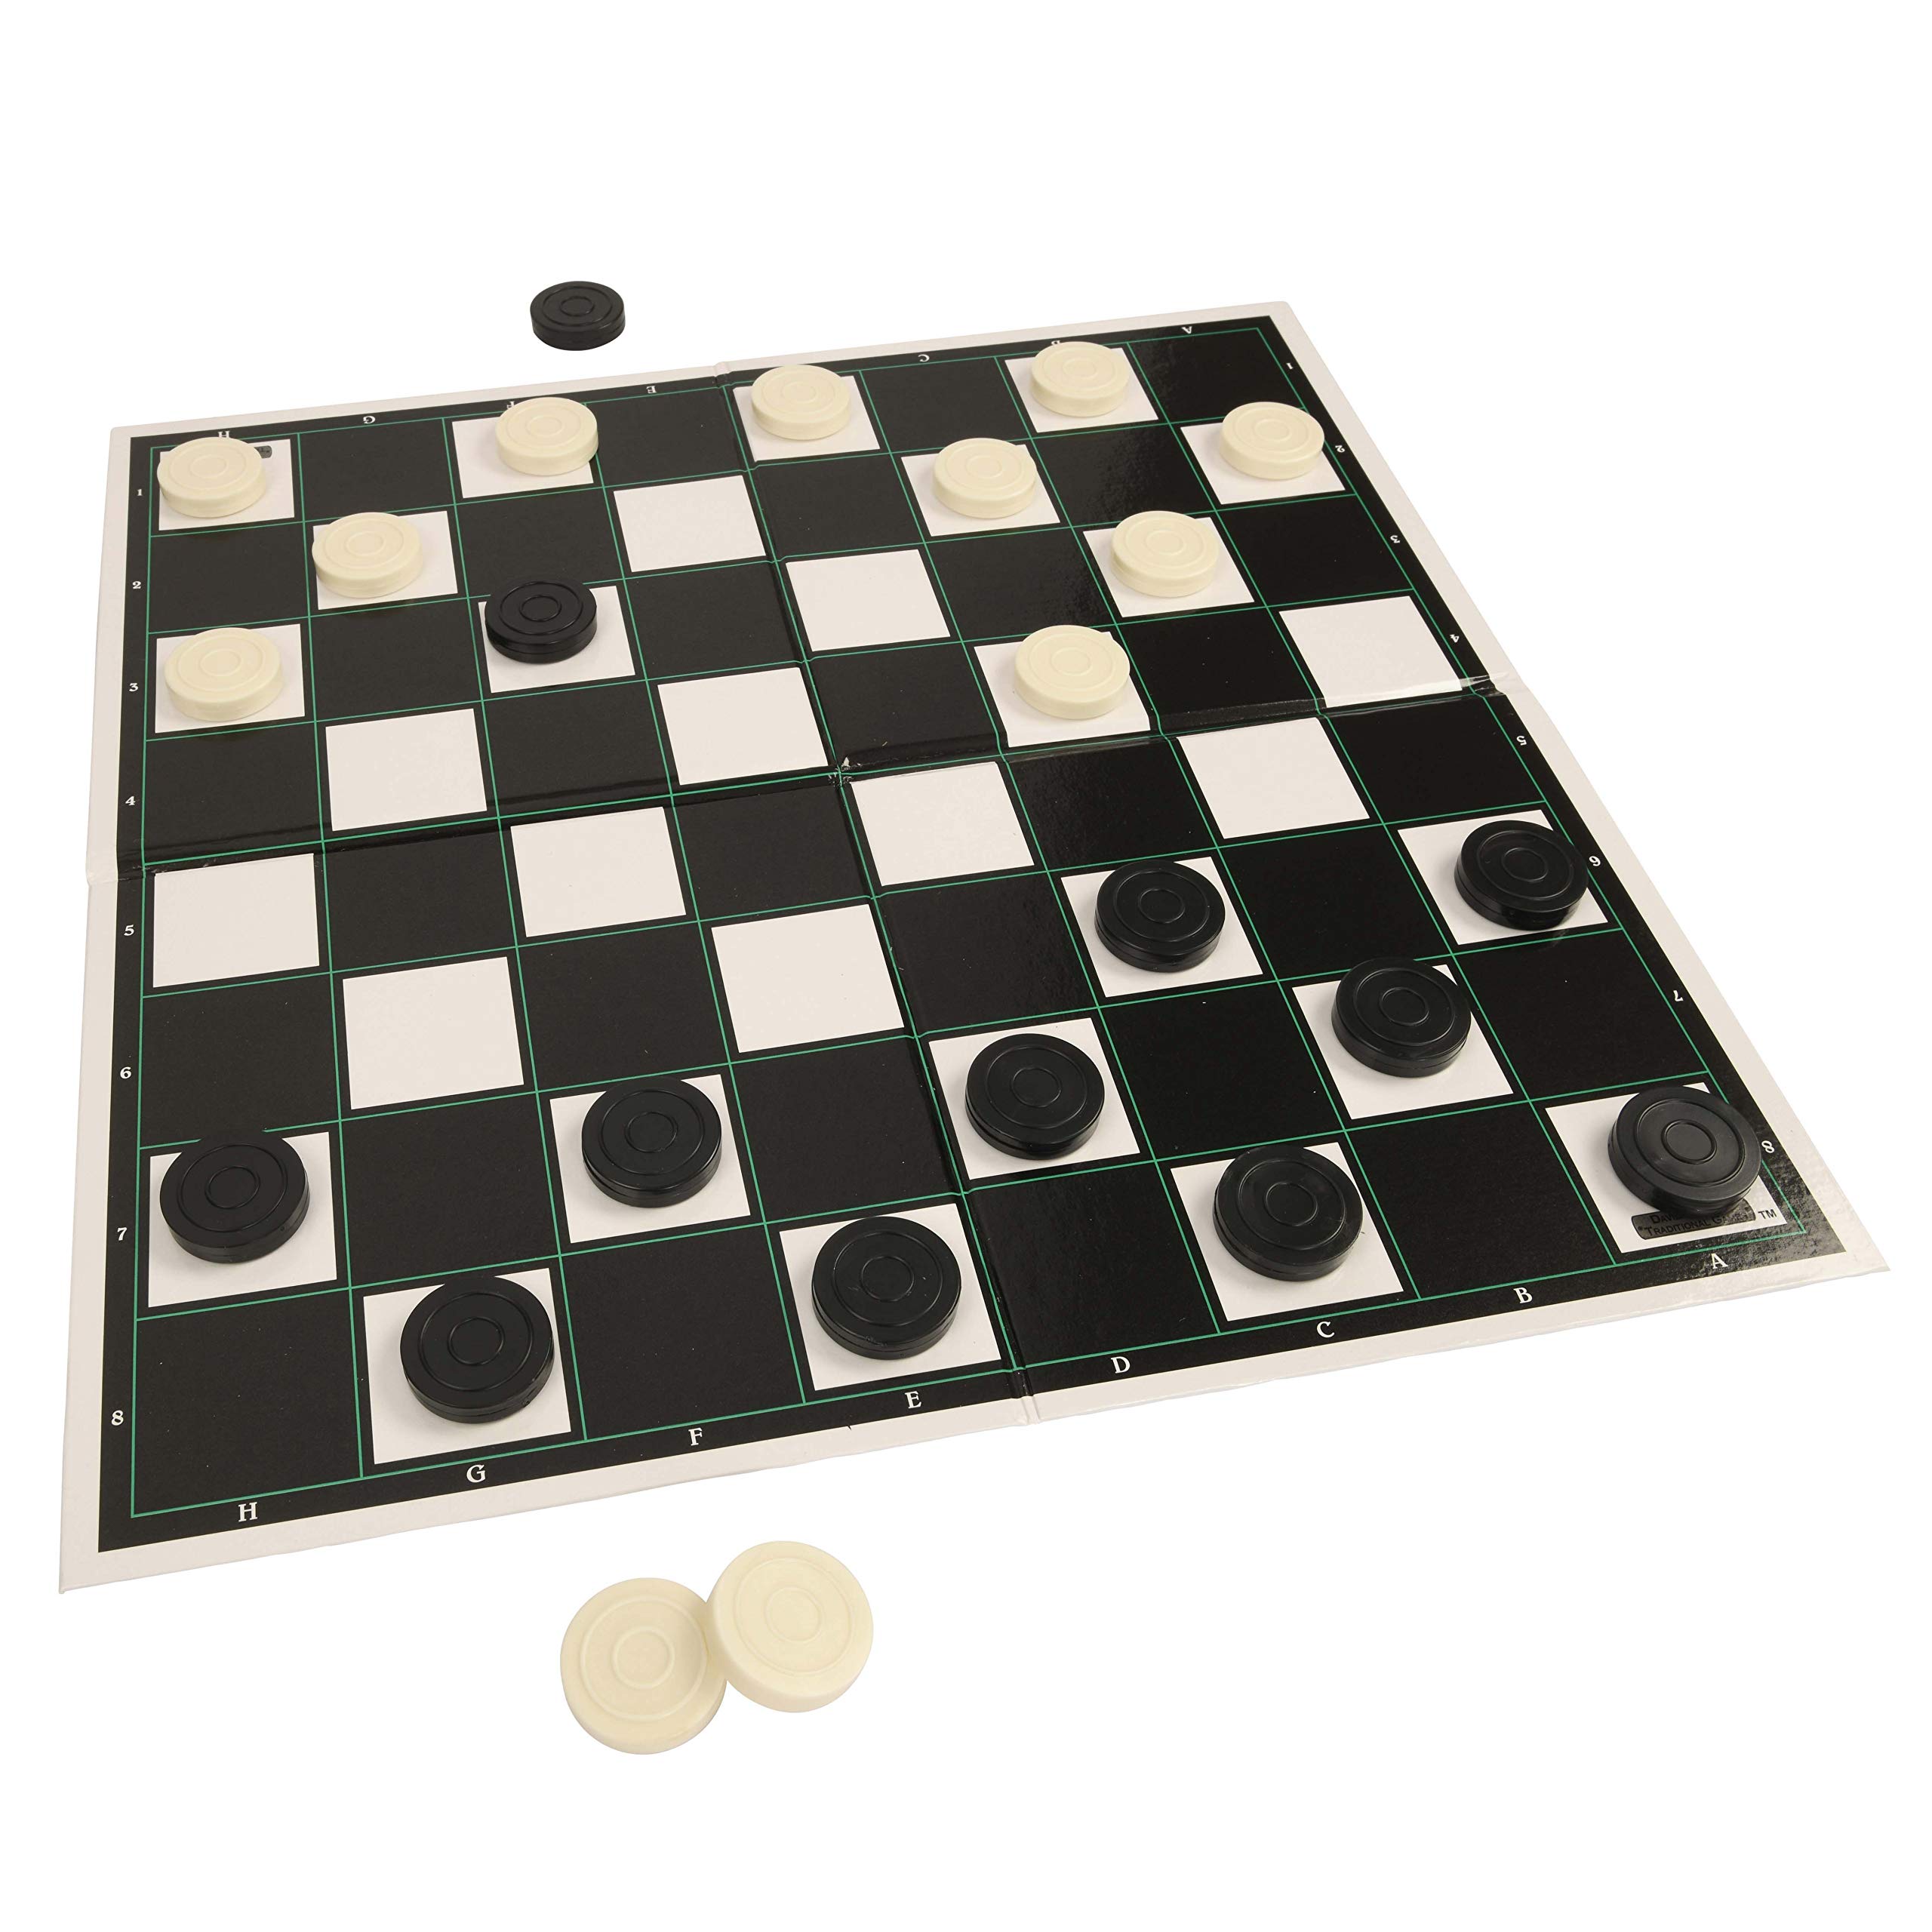 HTI Toys Traditional Games Draughts Set Board Game for Kids Adults